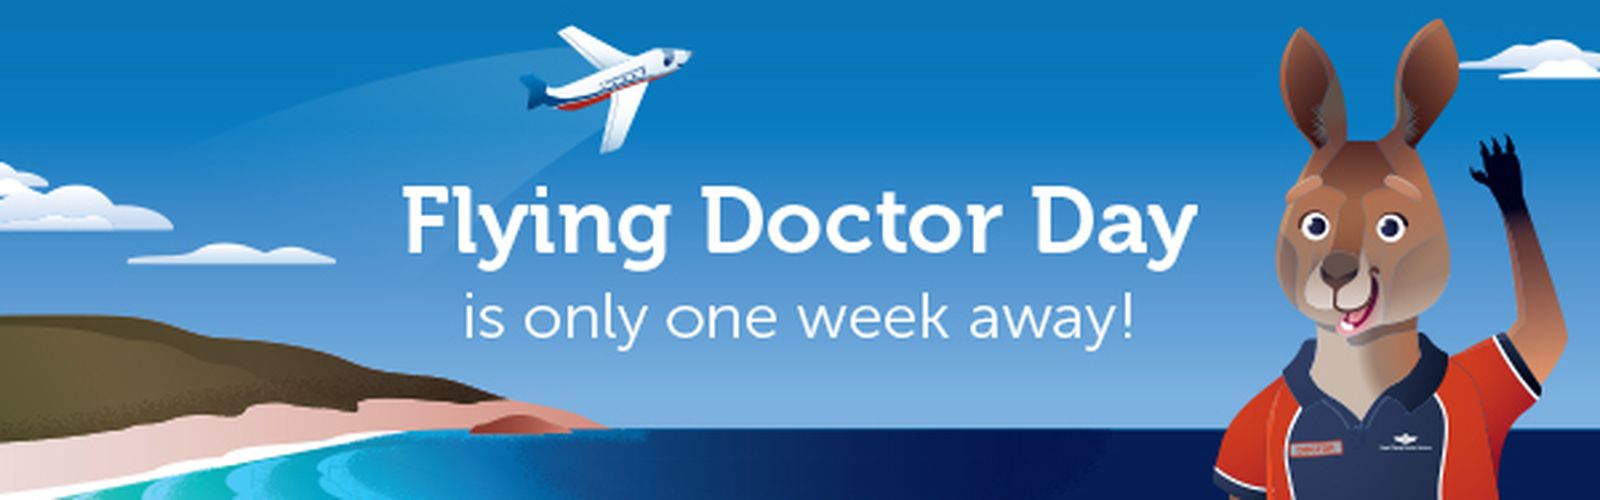 Flying Doctor Day 